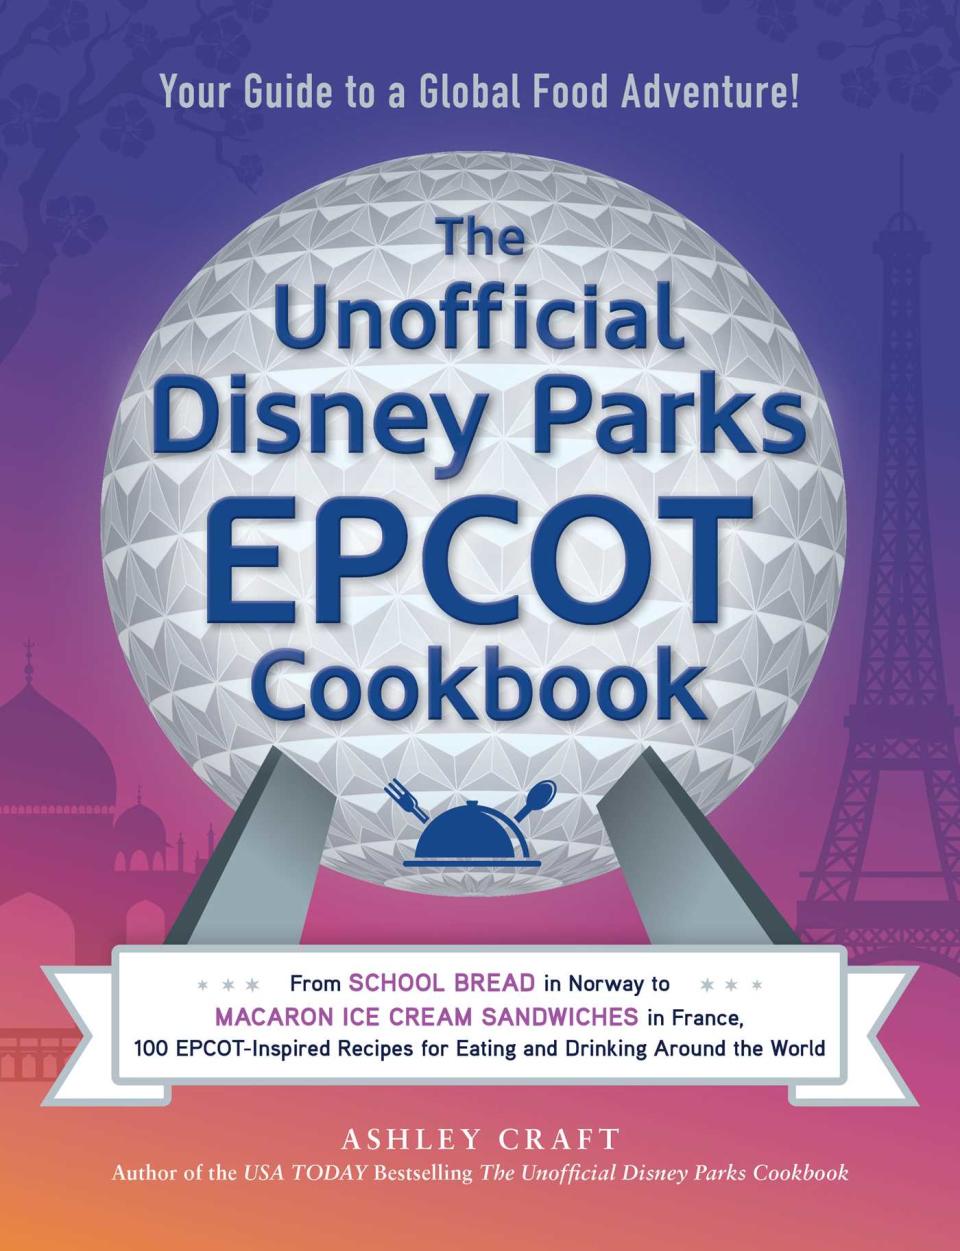 Ready for a global food adventure at home? Try your hand at whipping up the goodies in "The Unofficial Disney Parks EPCOT Cookbook,' by Ashley Craft.